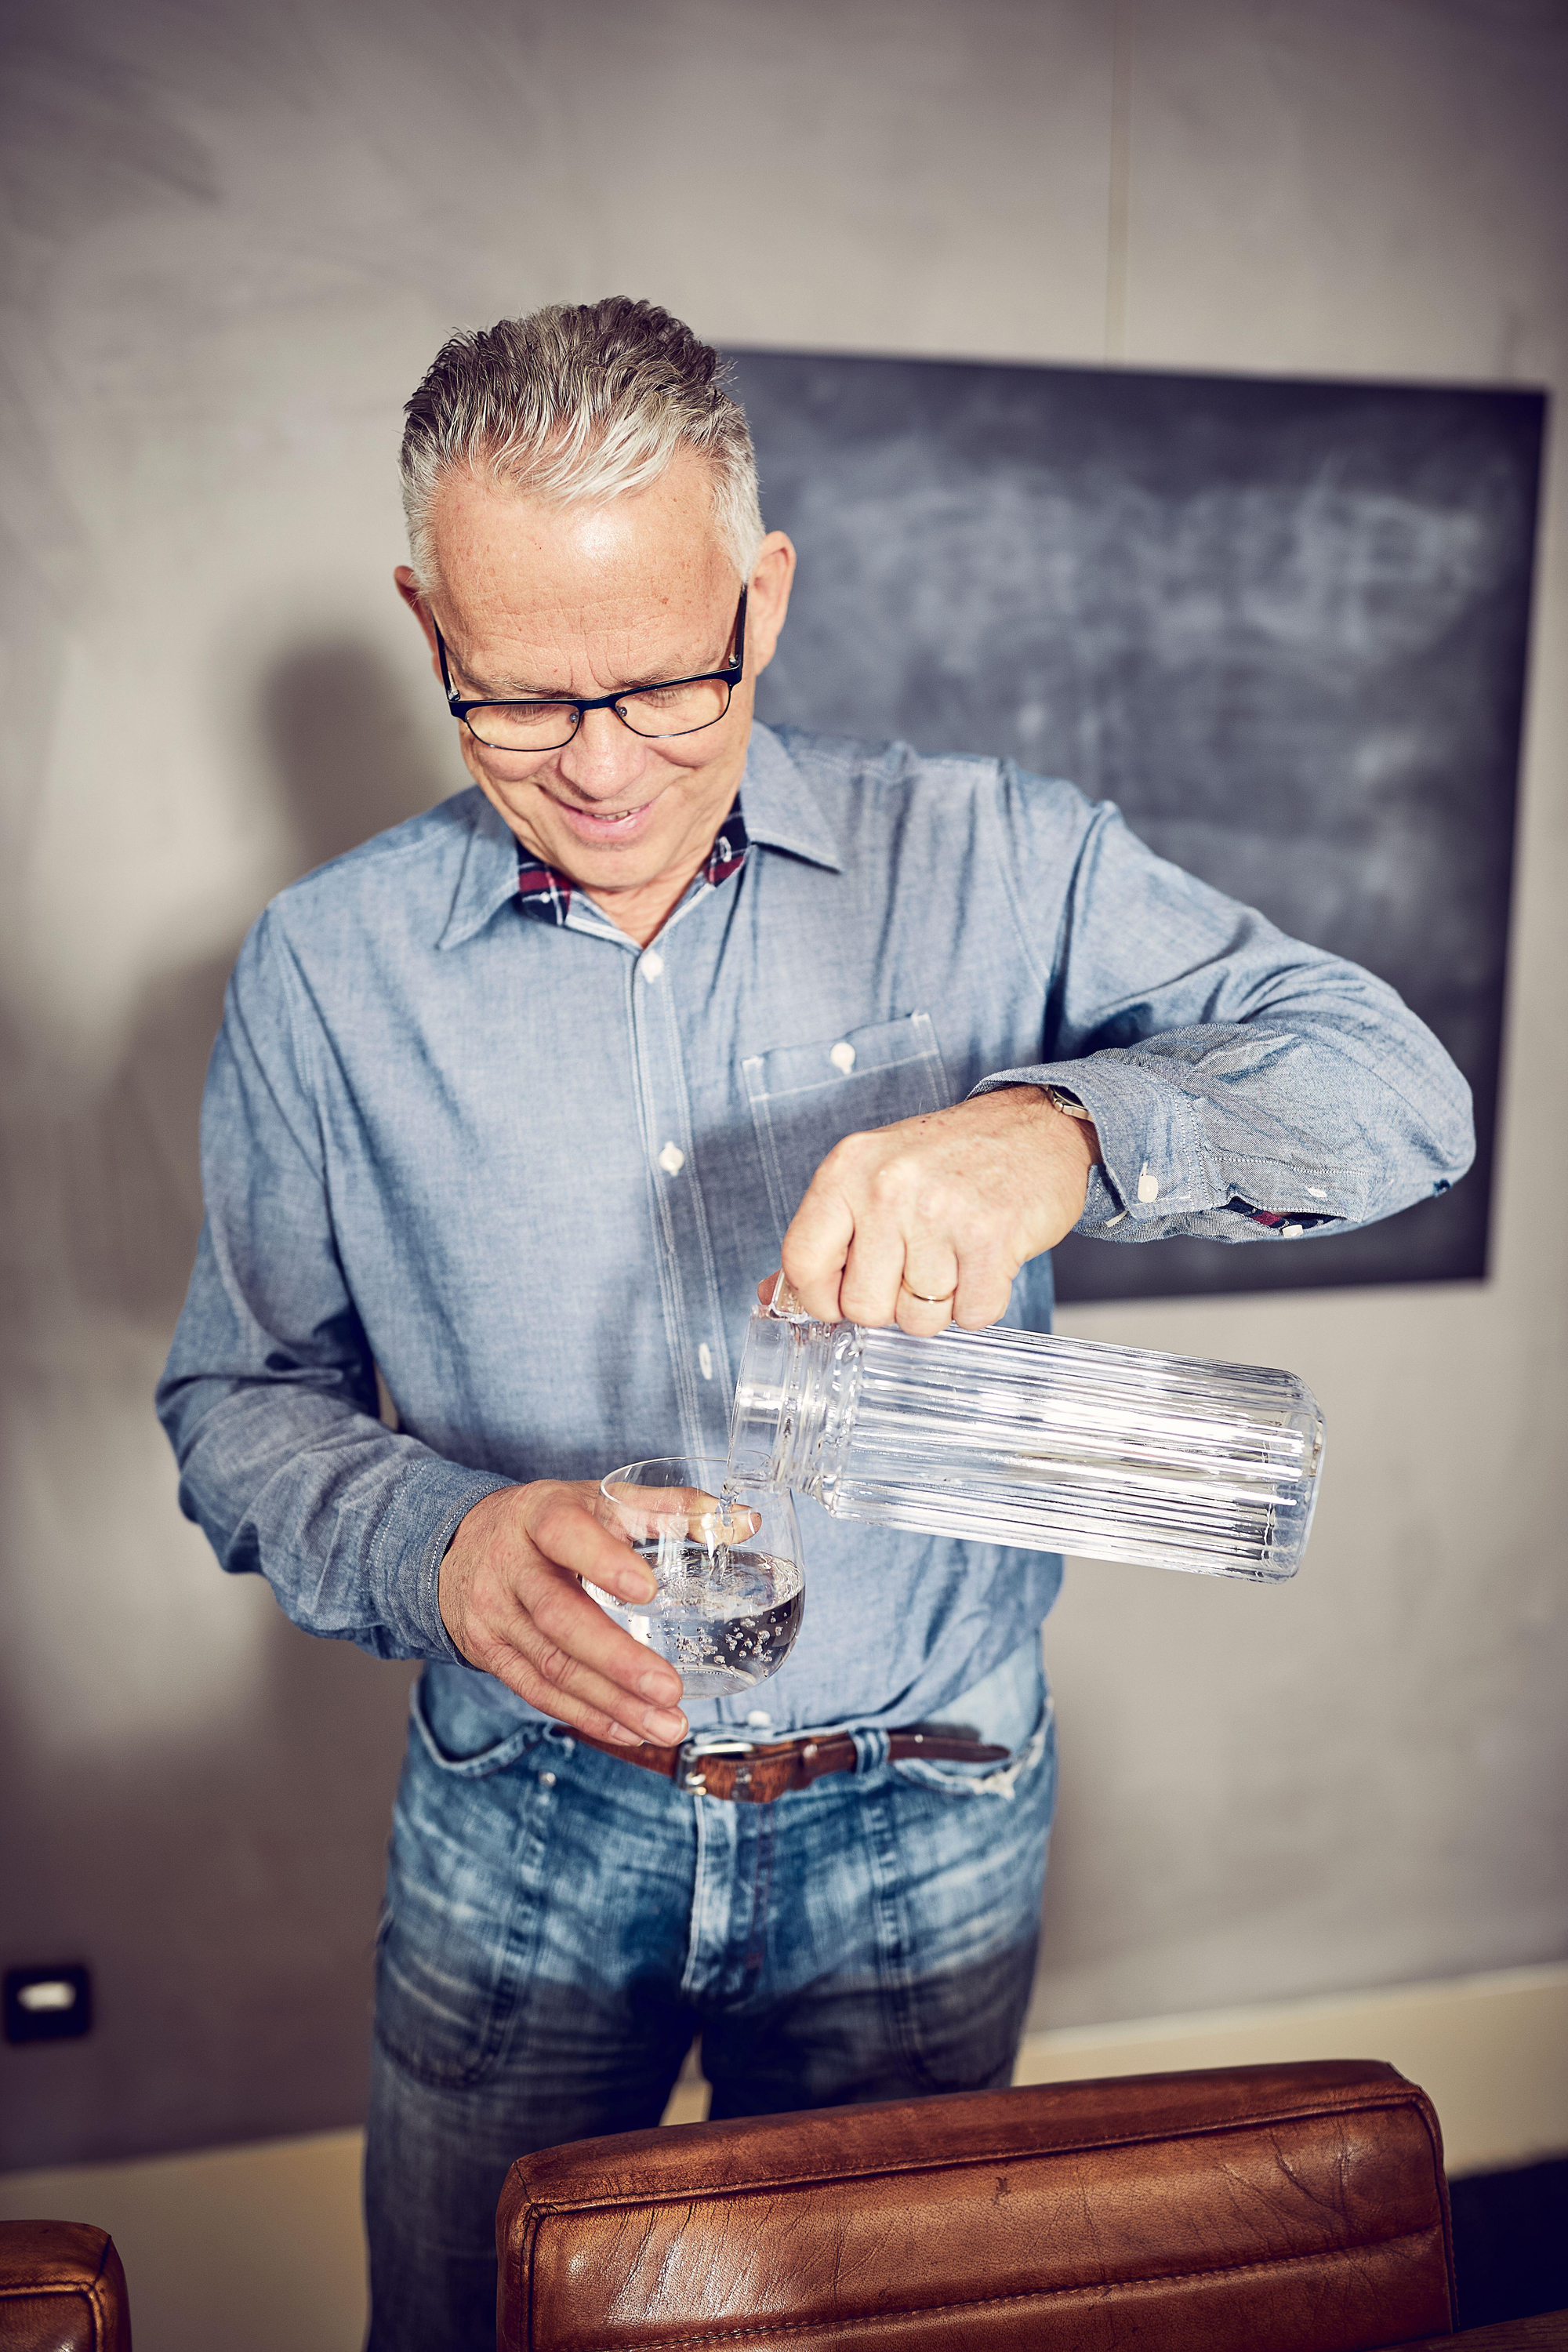 Man pouring water into glass